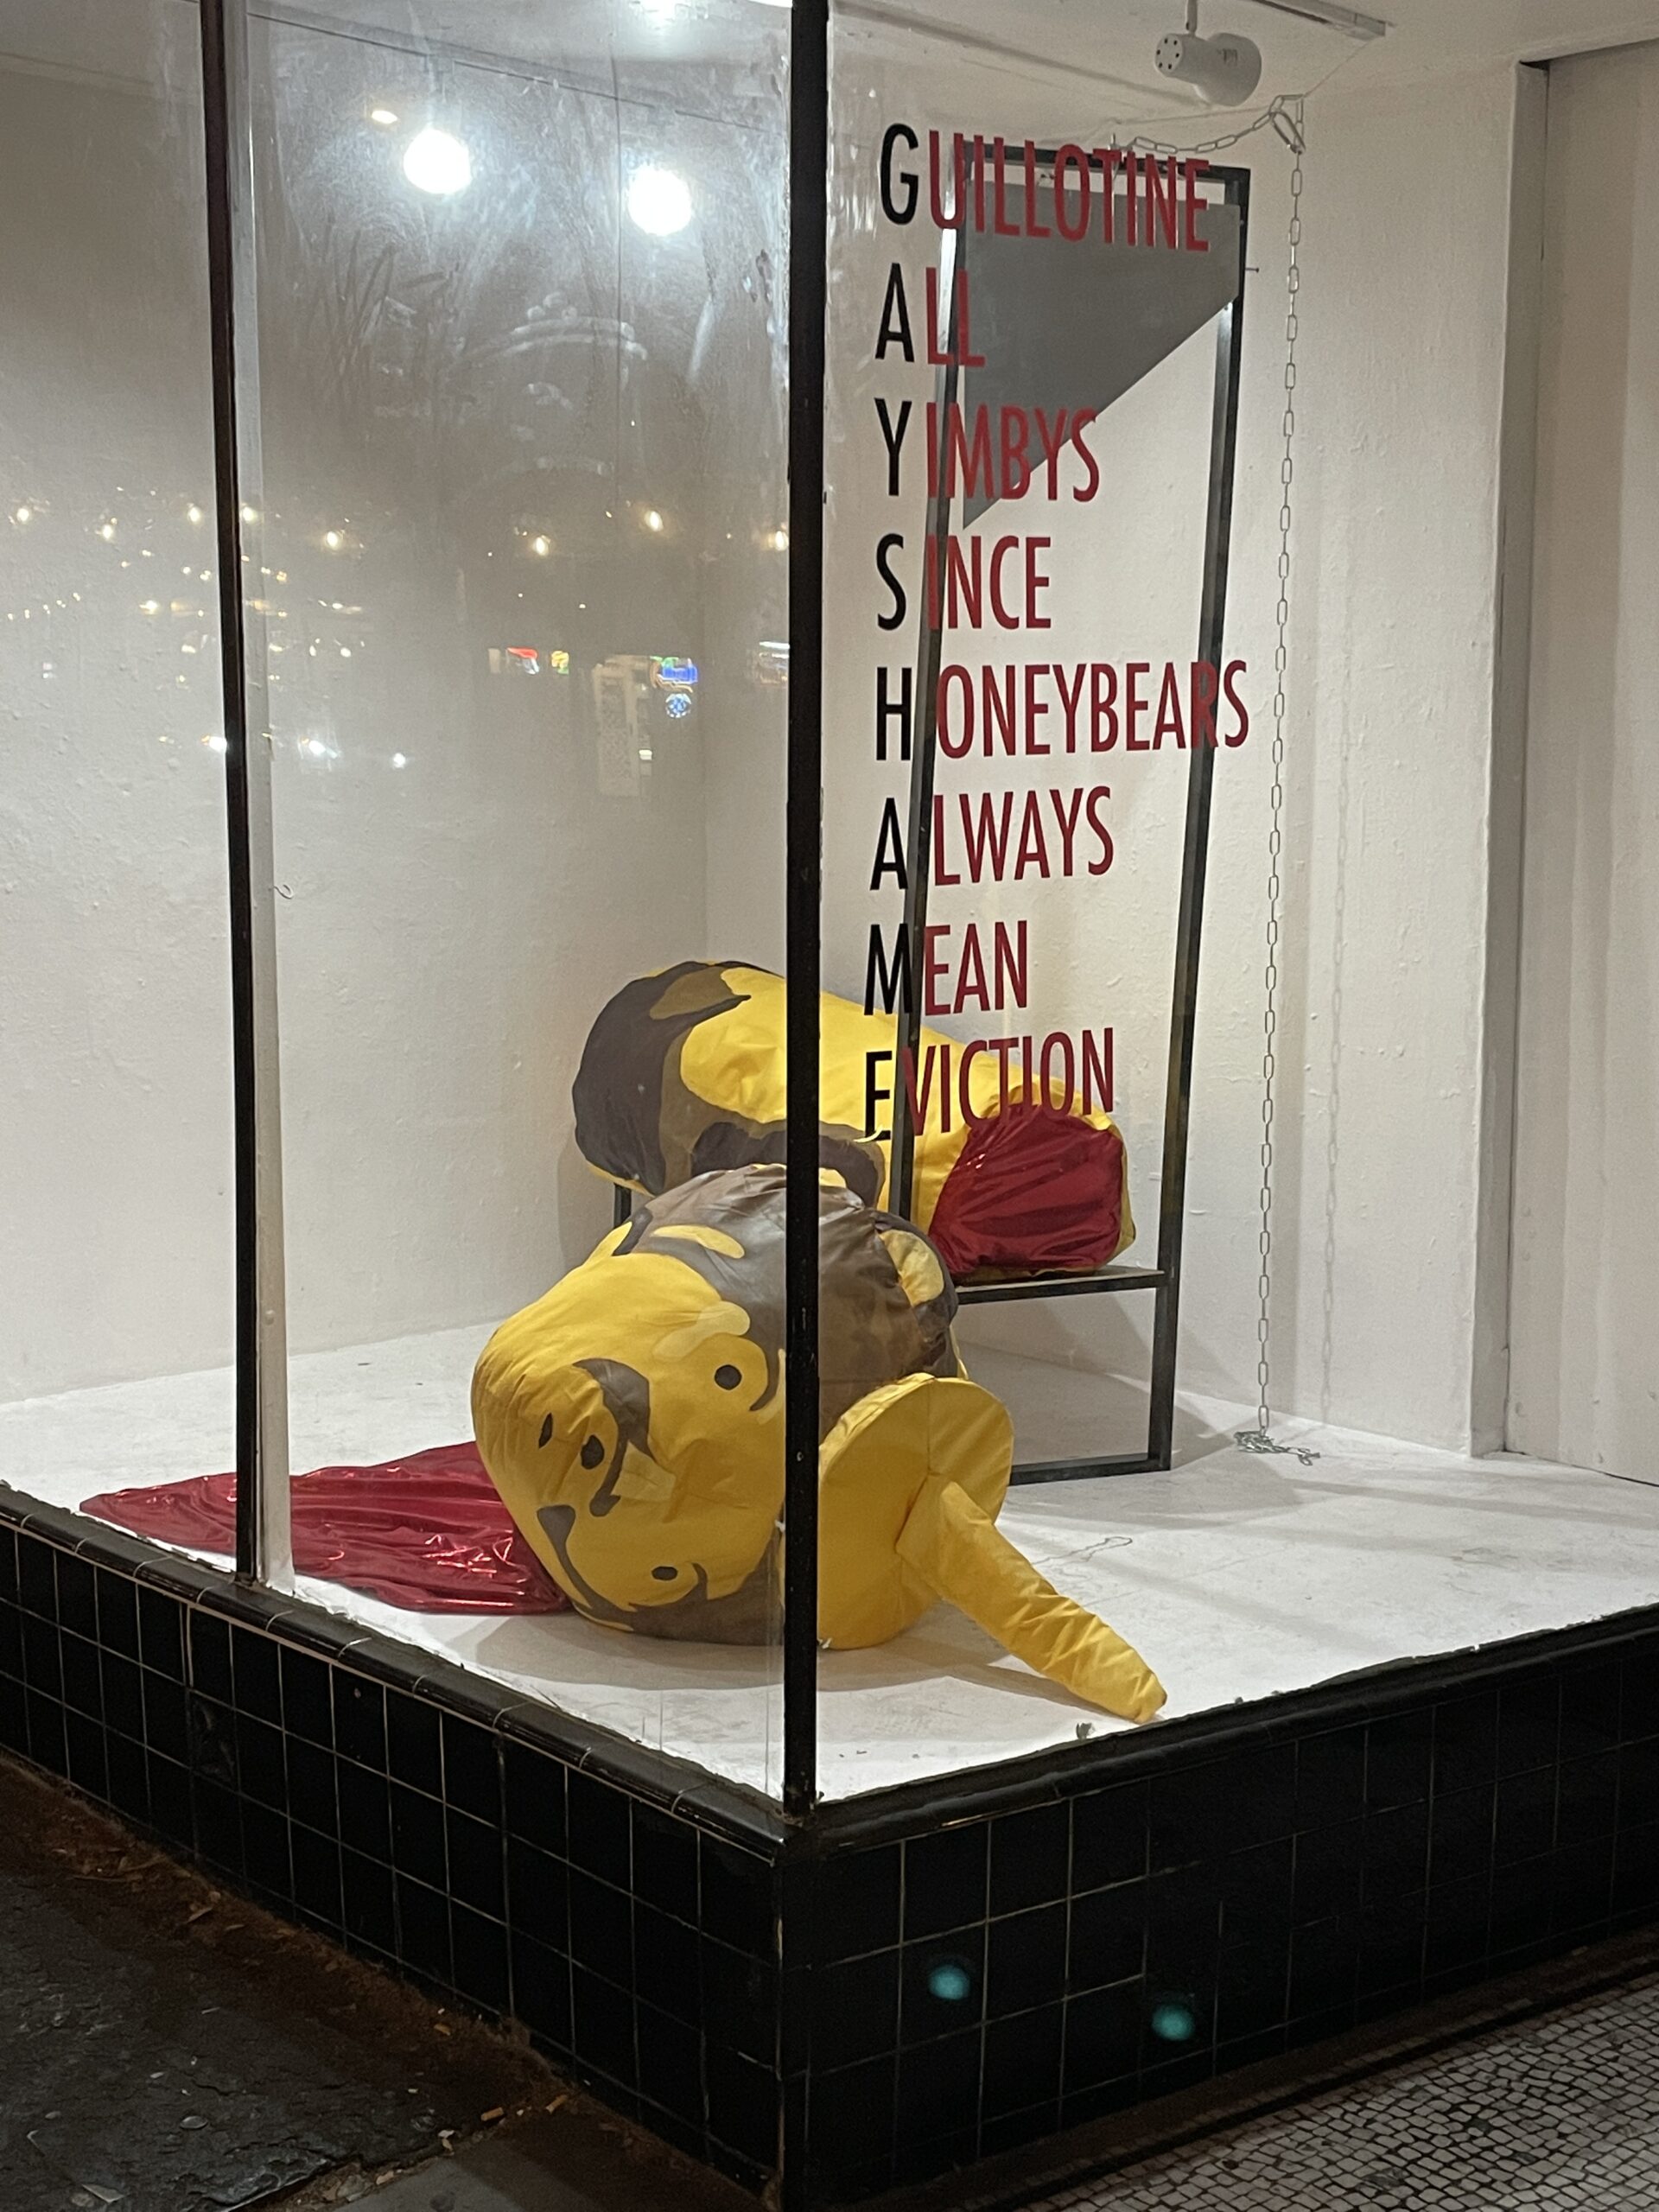 Photography of a honey bear that has been beheaded by a guillotine in a window display. On the window text reads "GUILLOTINE ALL YIMBYS SINCE HONEYBEARS ALWAYS MEAN EVICTION"